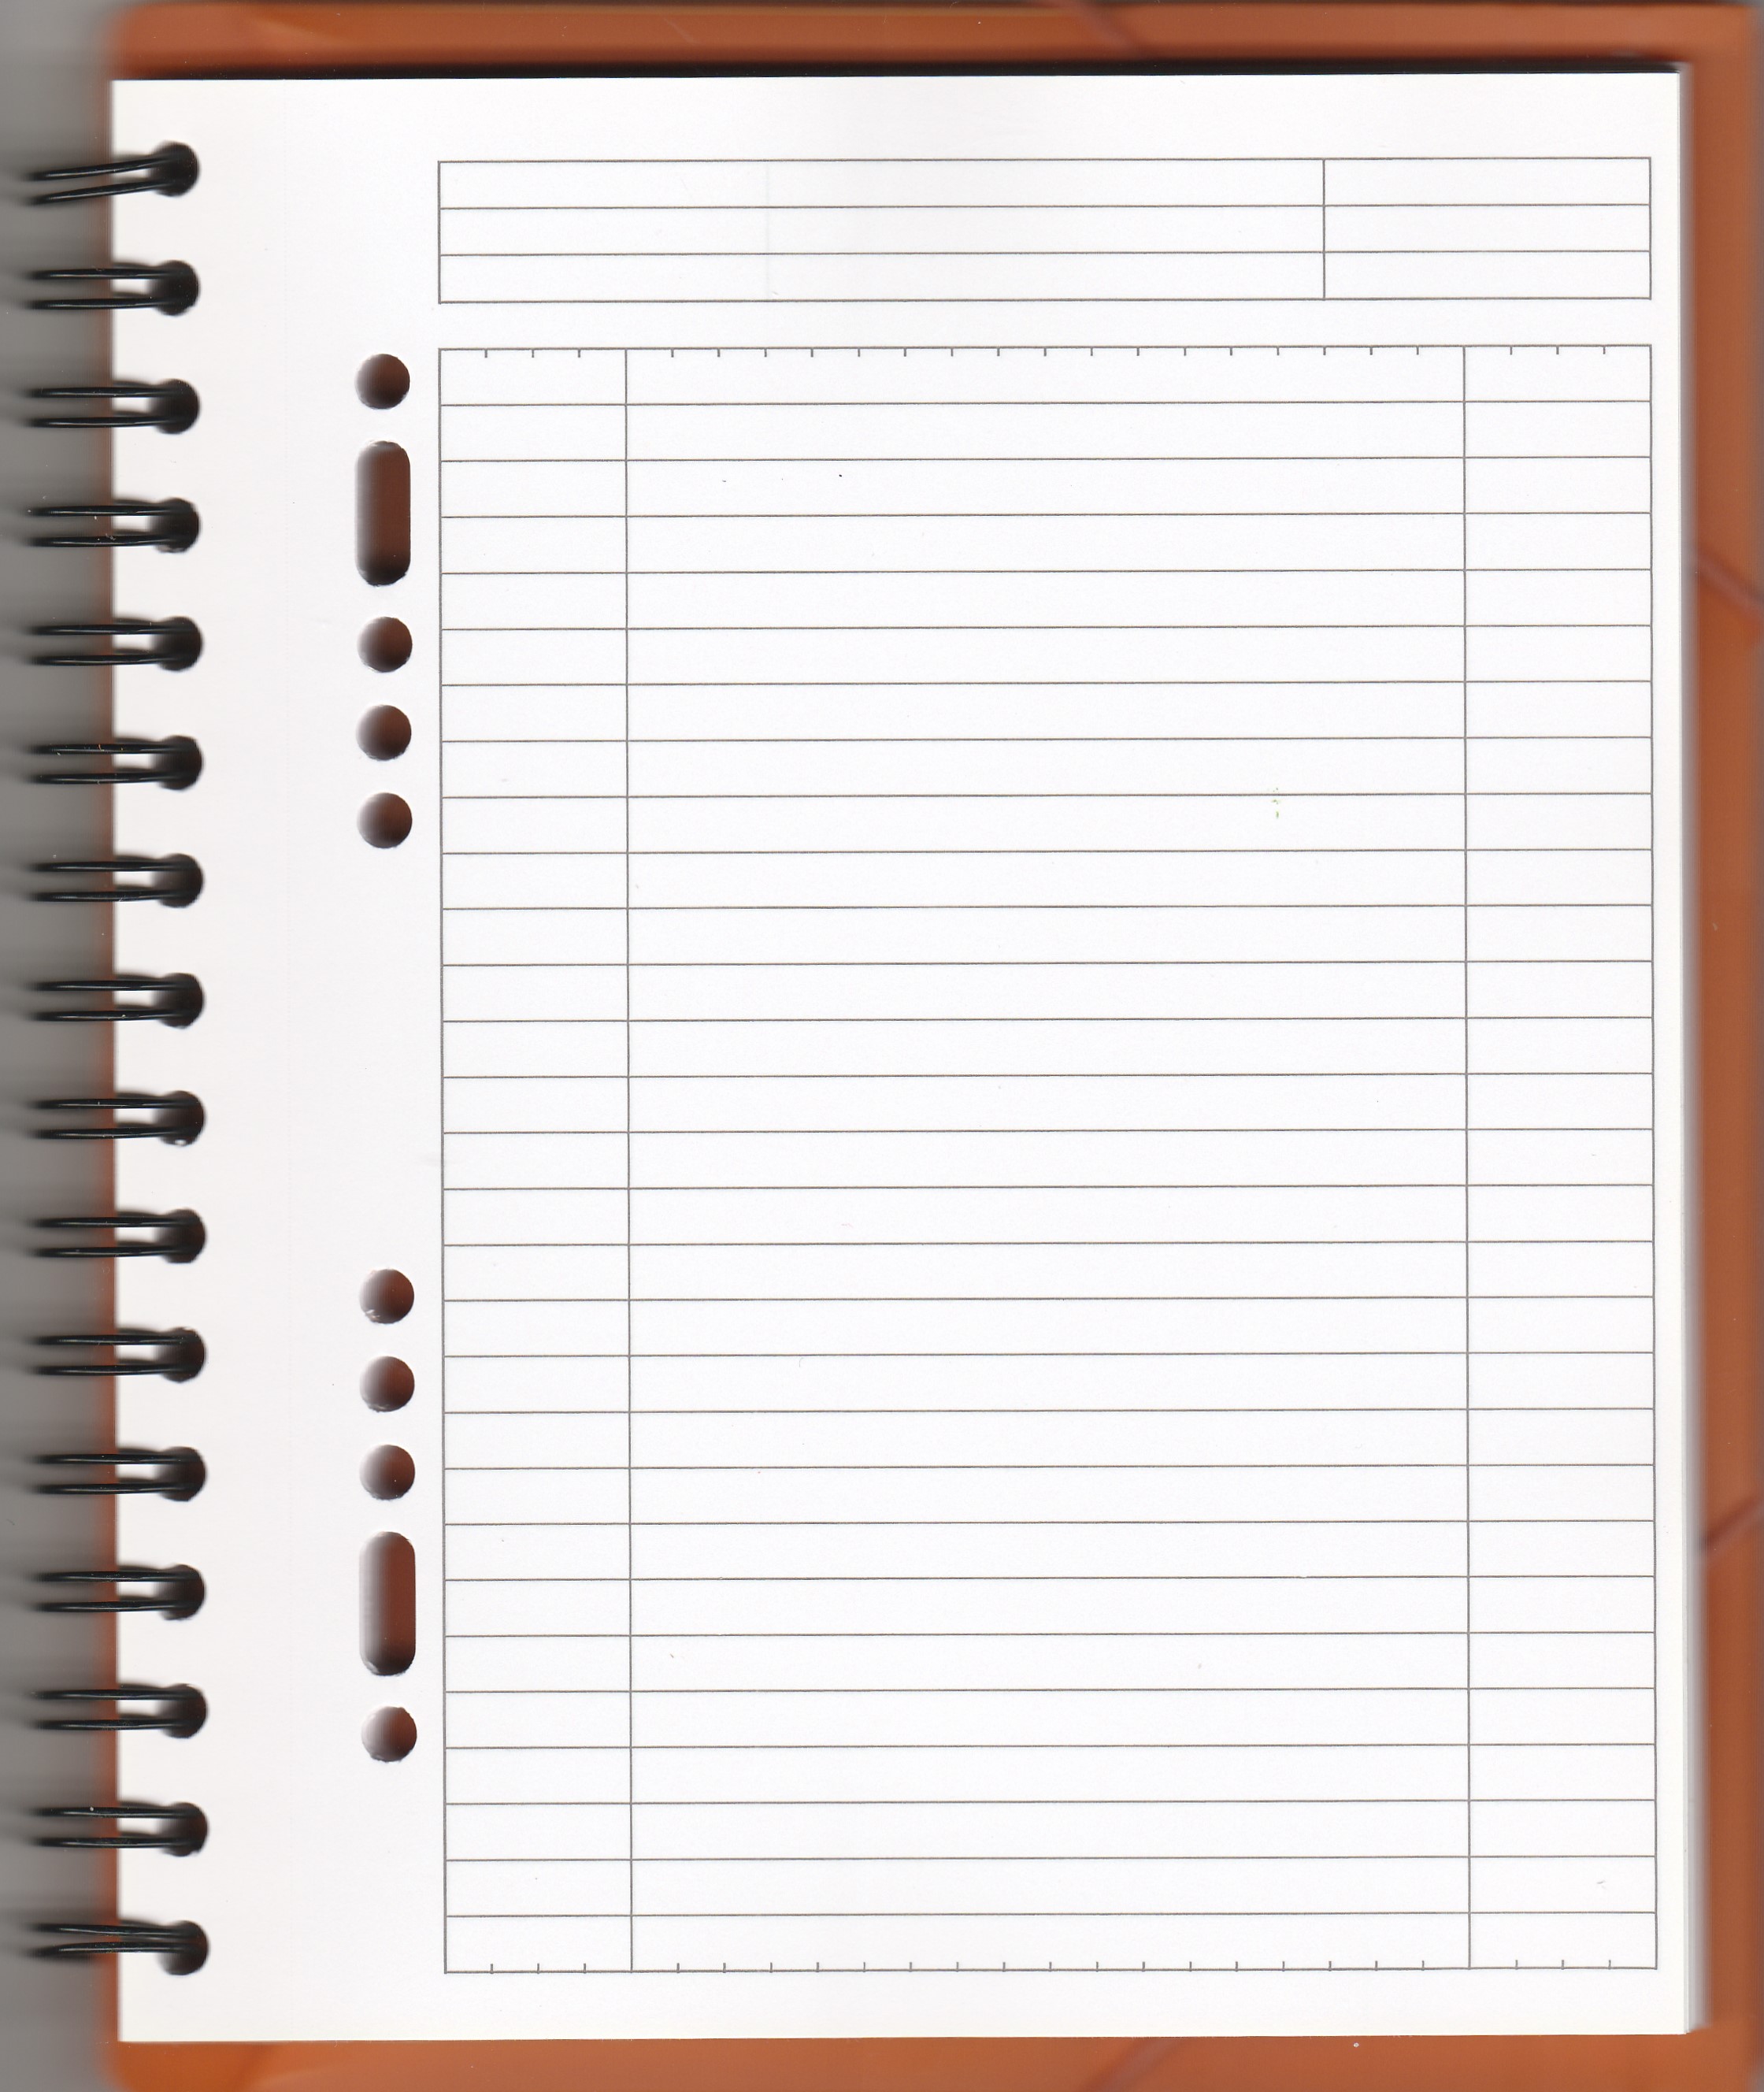 Oxford Meetingbook A5+ lined